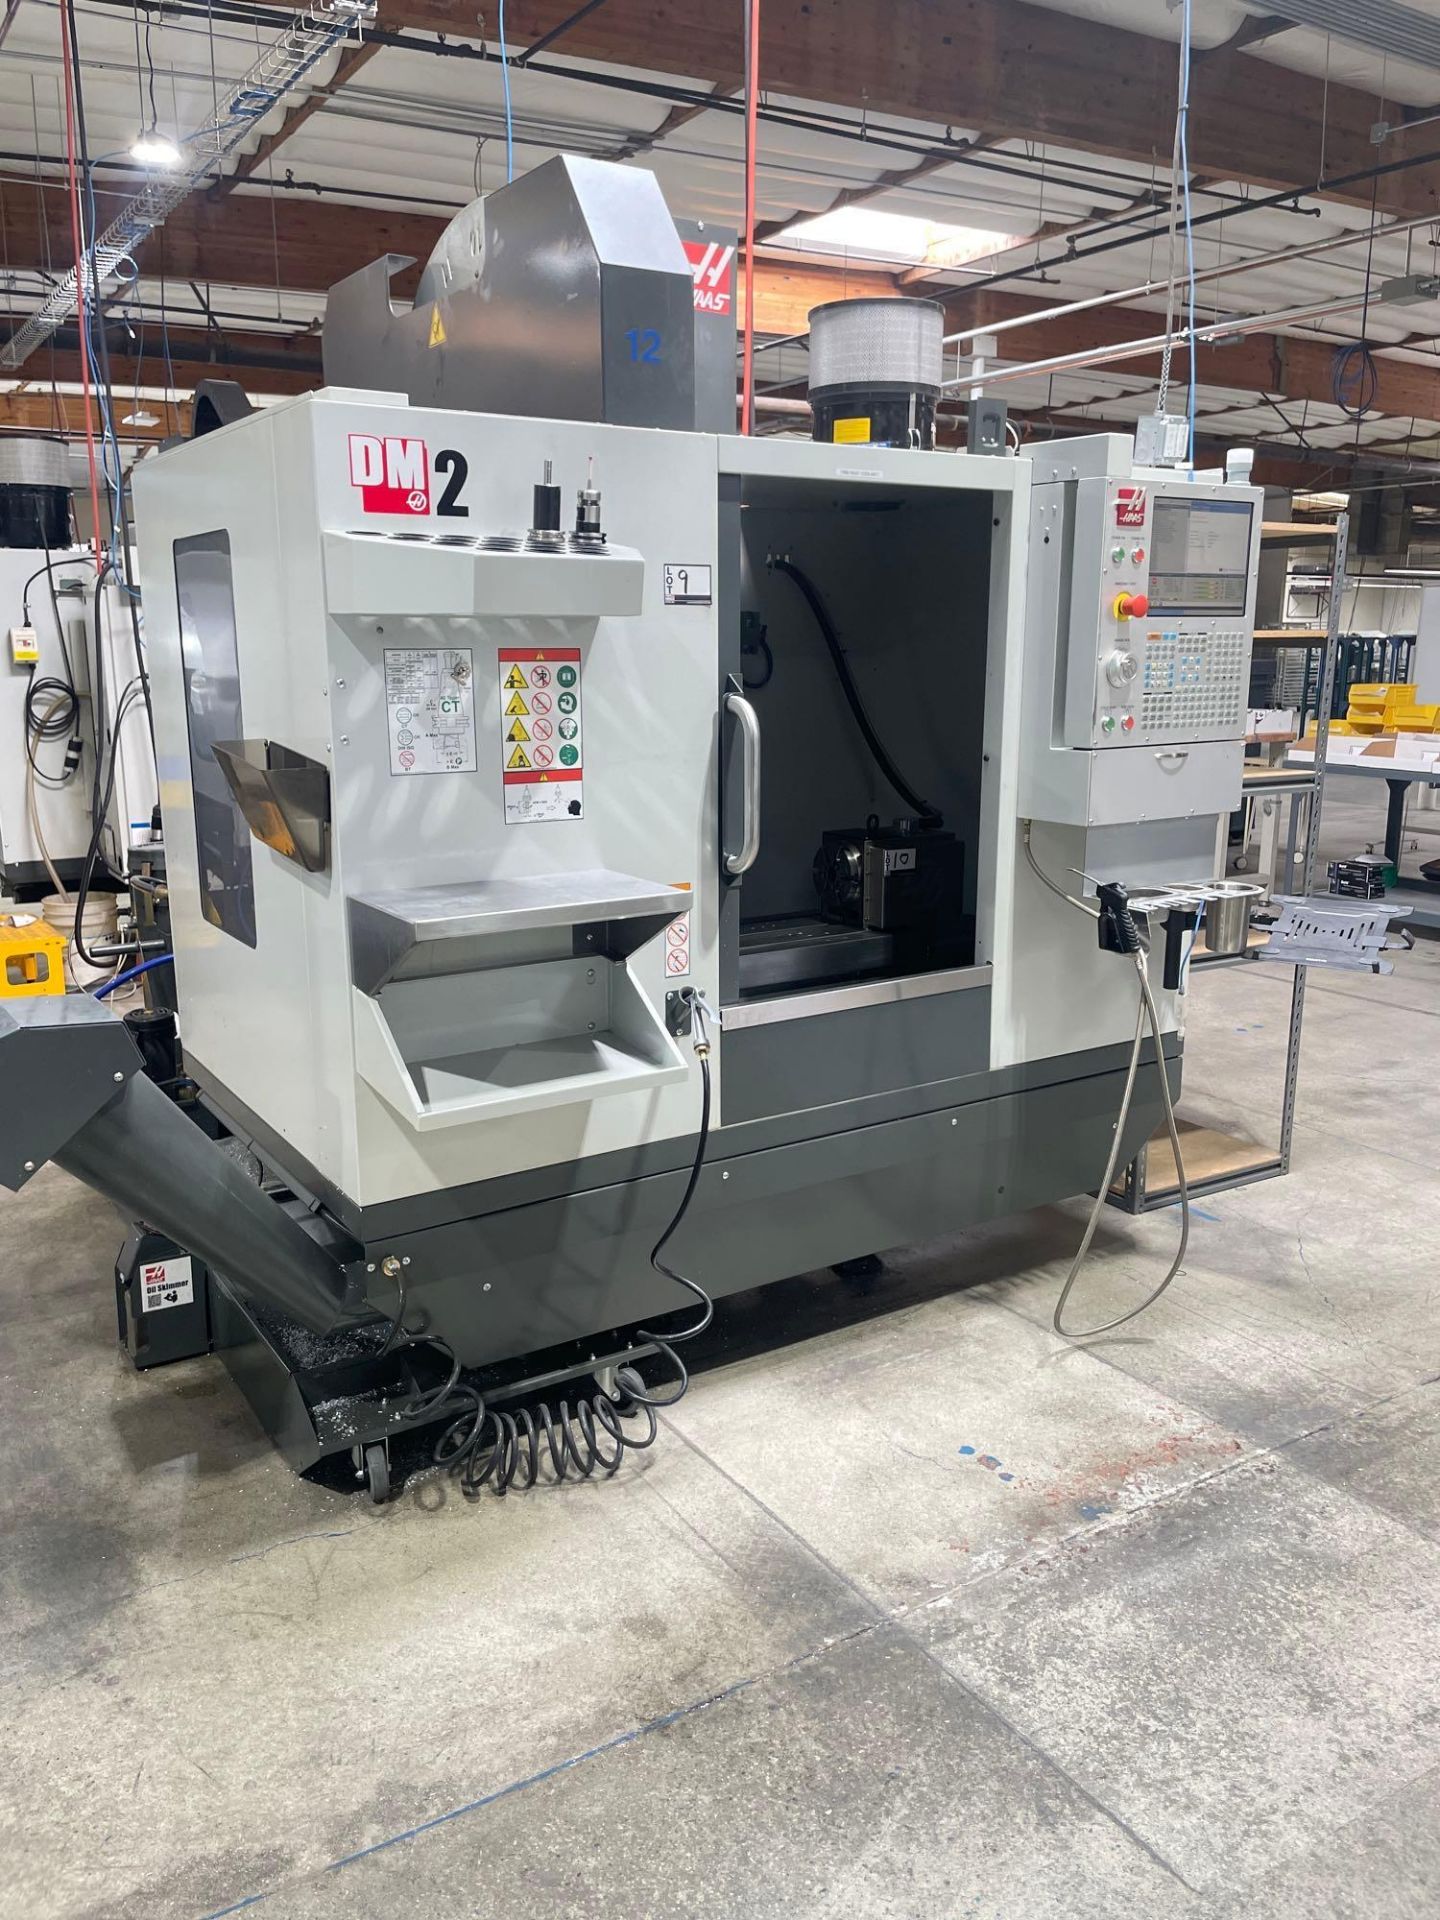 Haas DM-2, 28” x 16” x 15.5” Travels, CT 40, 18+1 SMTC, CTS, WIPS, as New as 2021 - Image 2 of 10